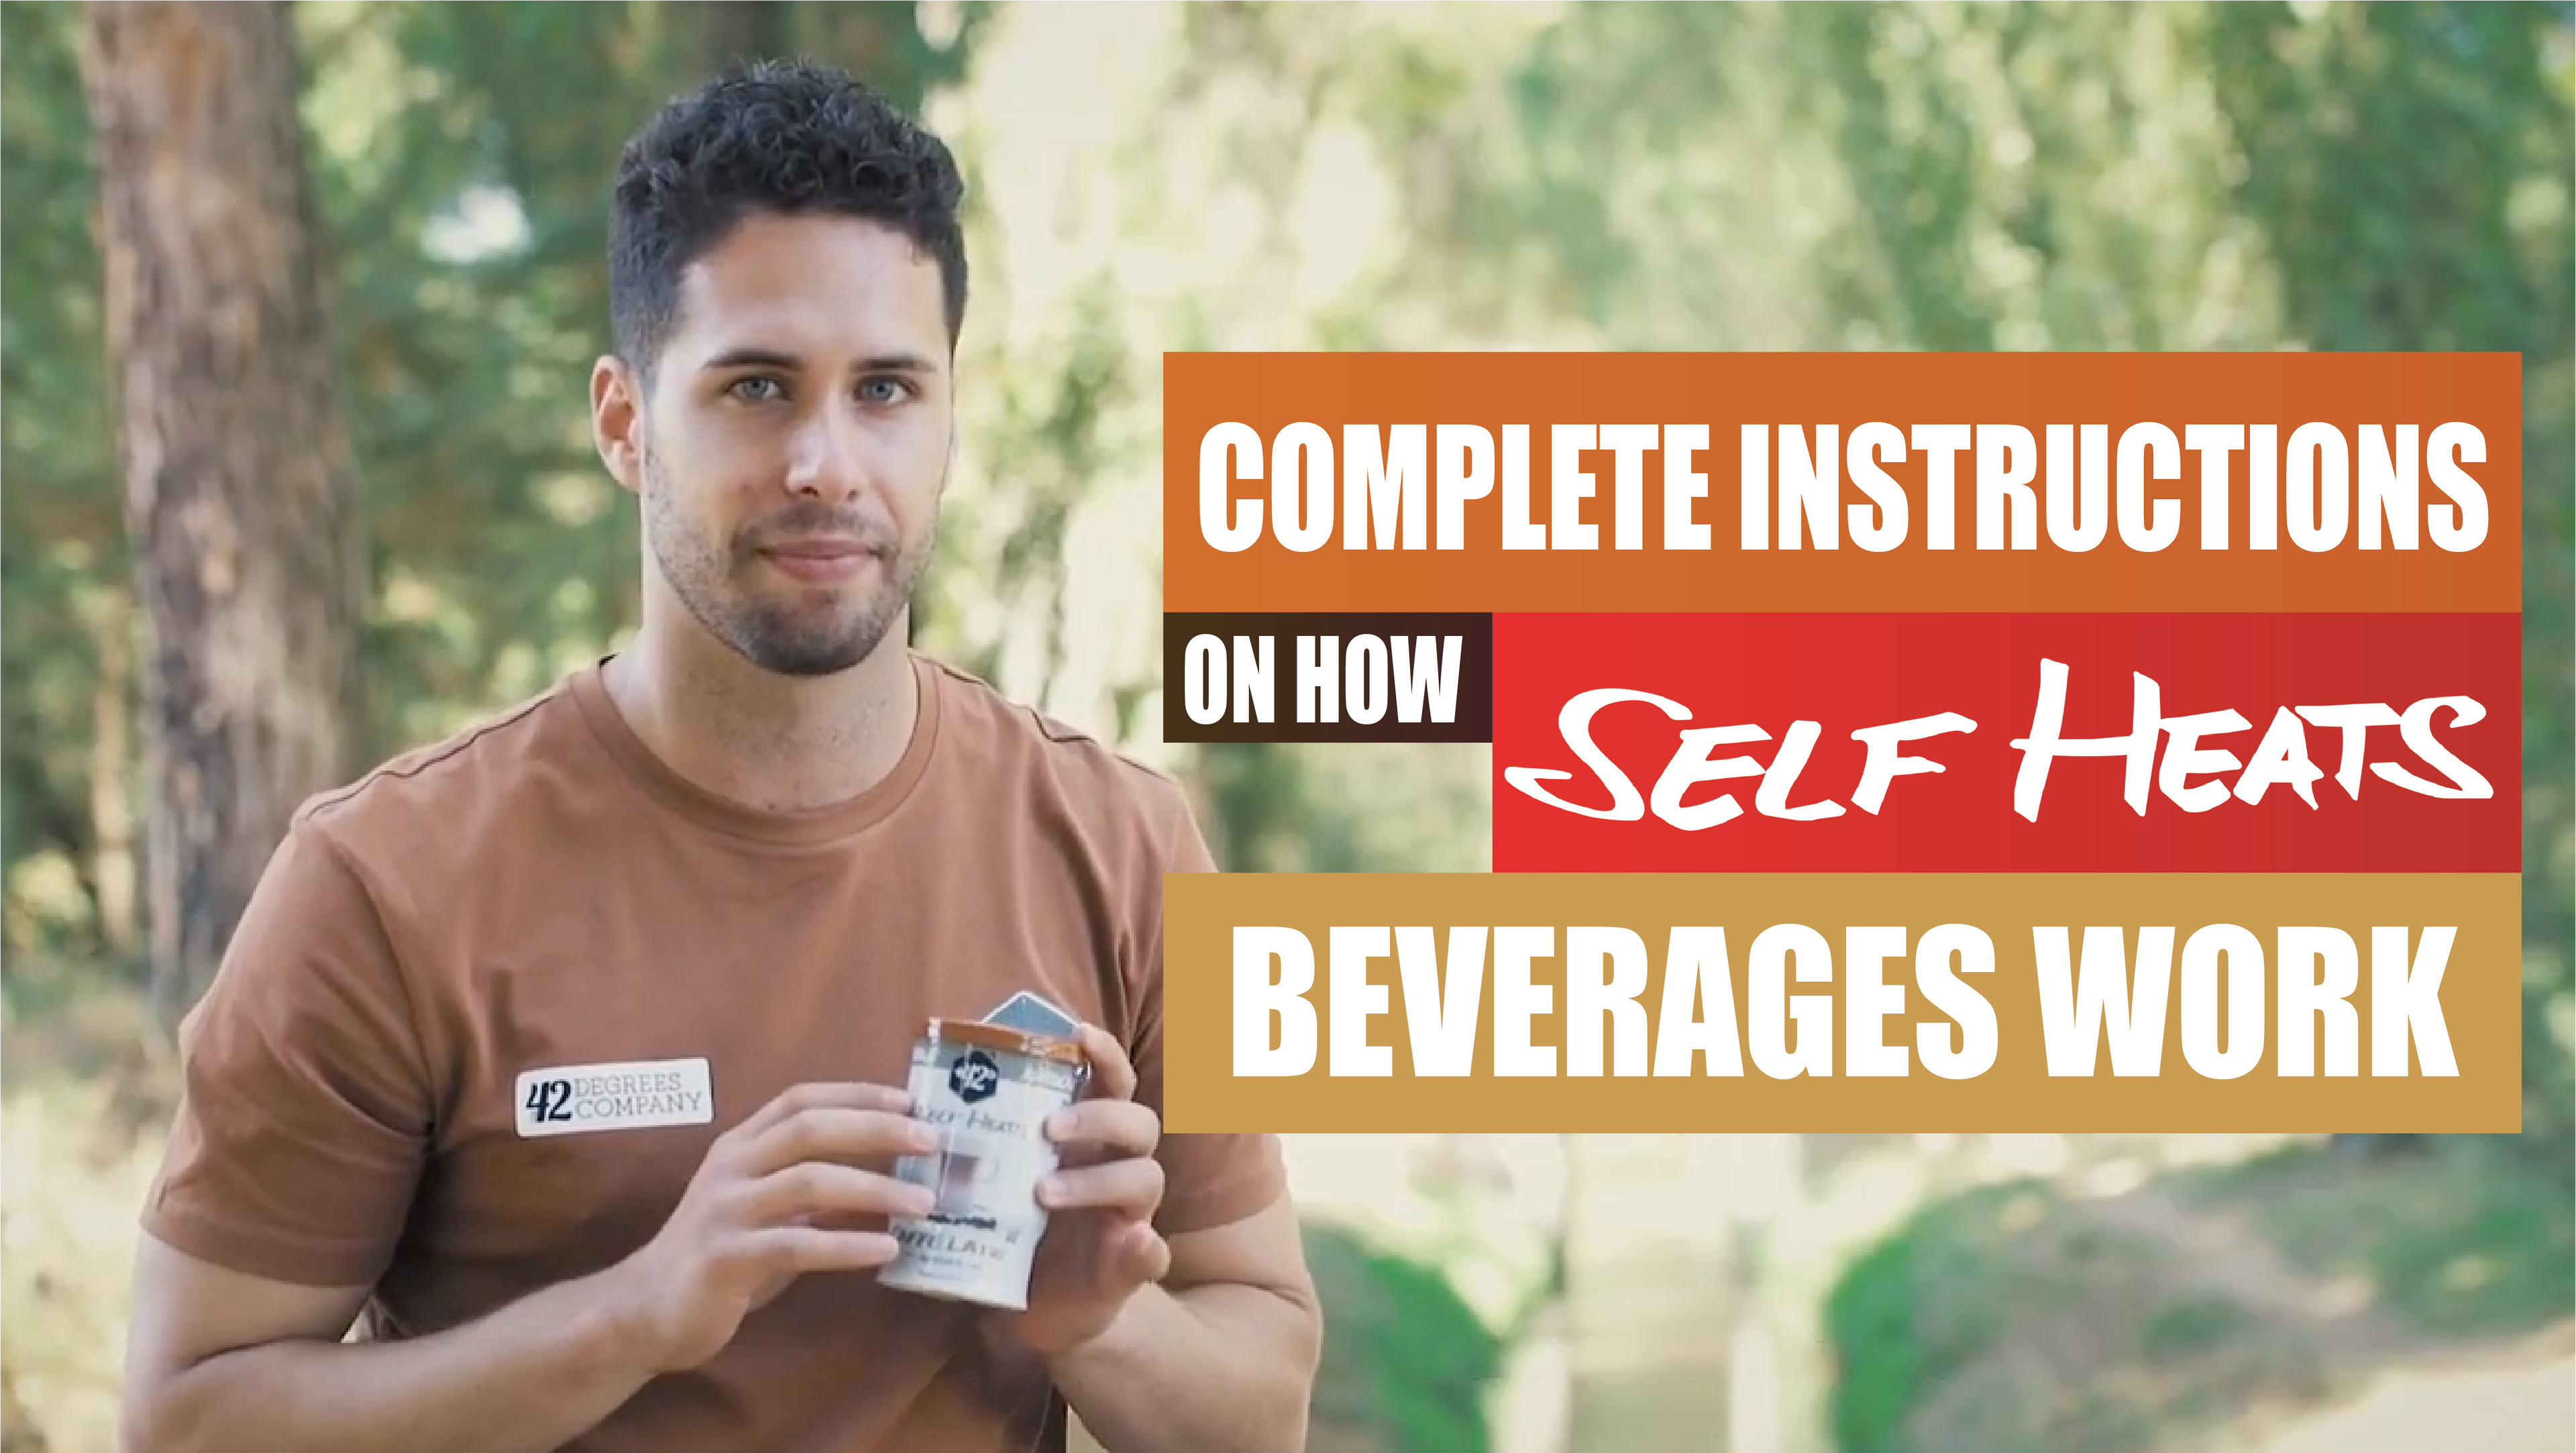 Load video: Complete instruction video on how self heating beverages and soups work in English